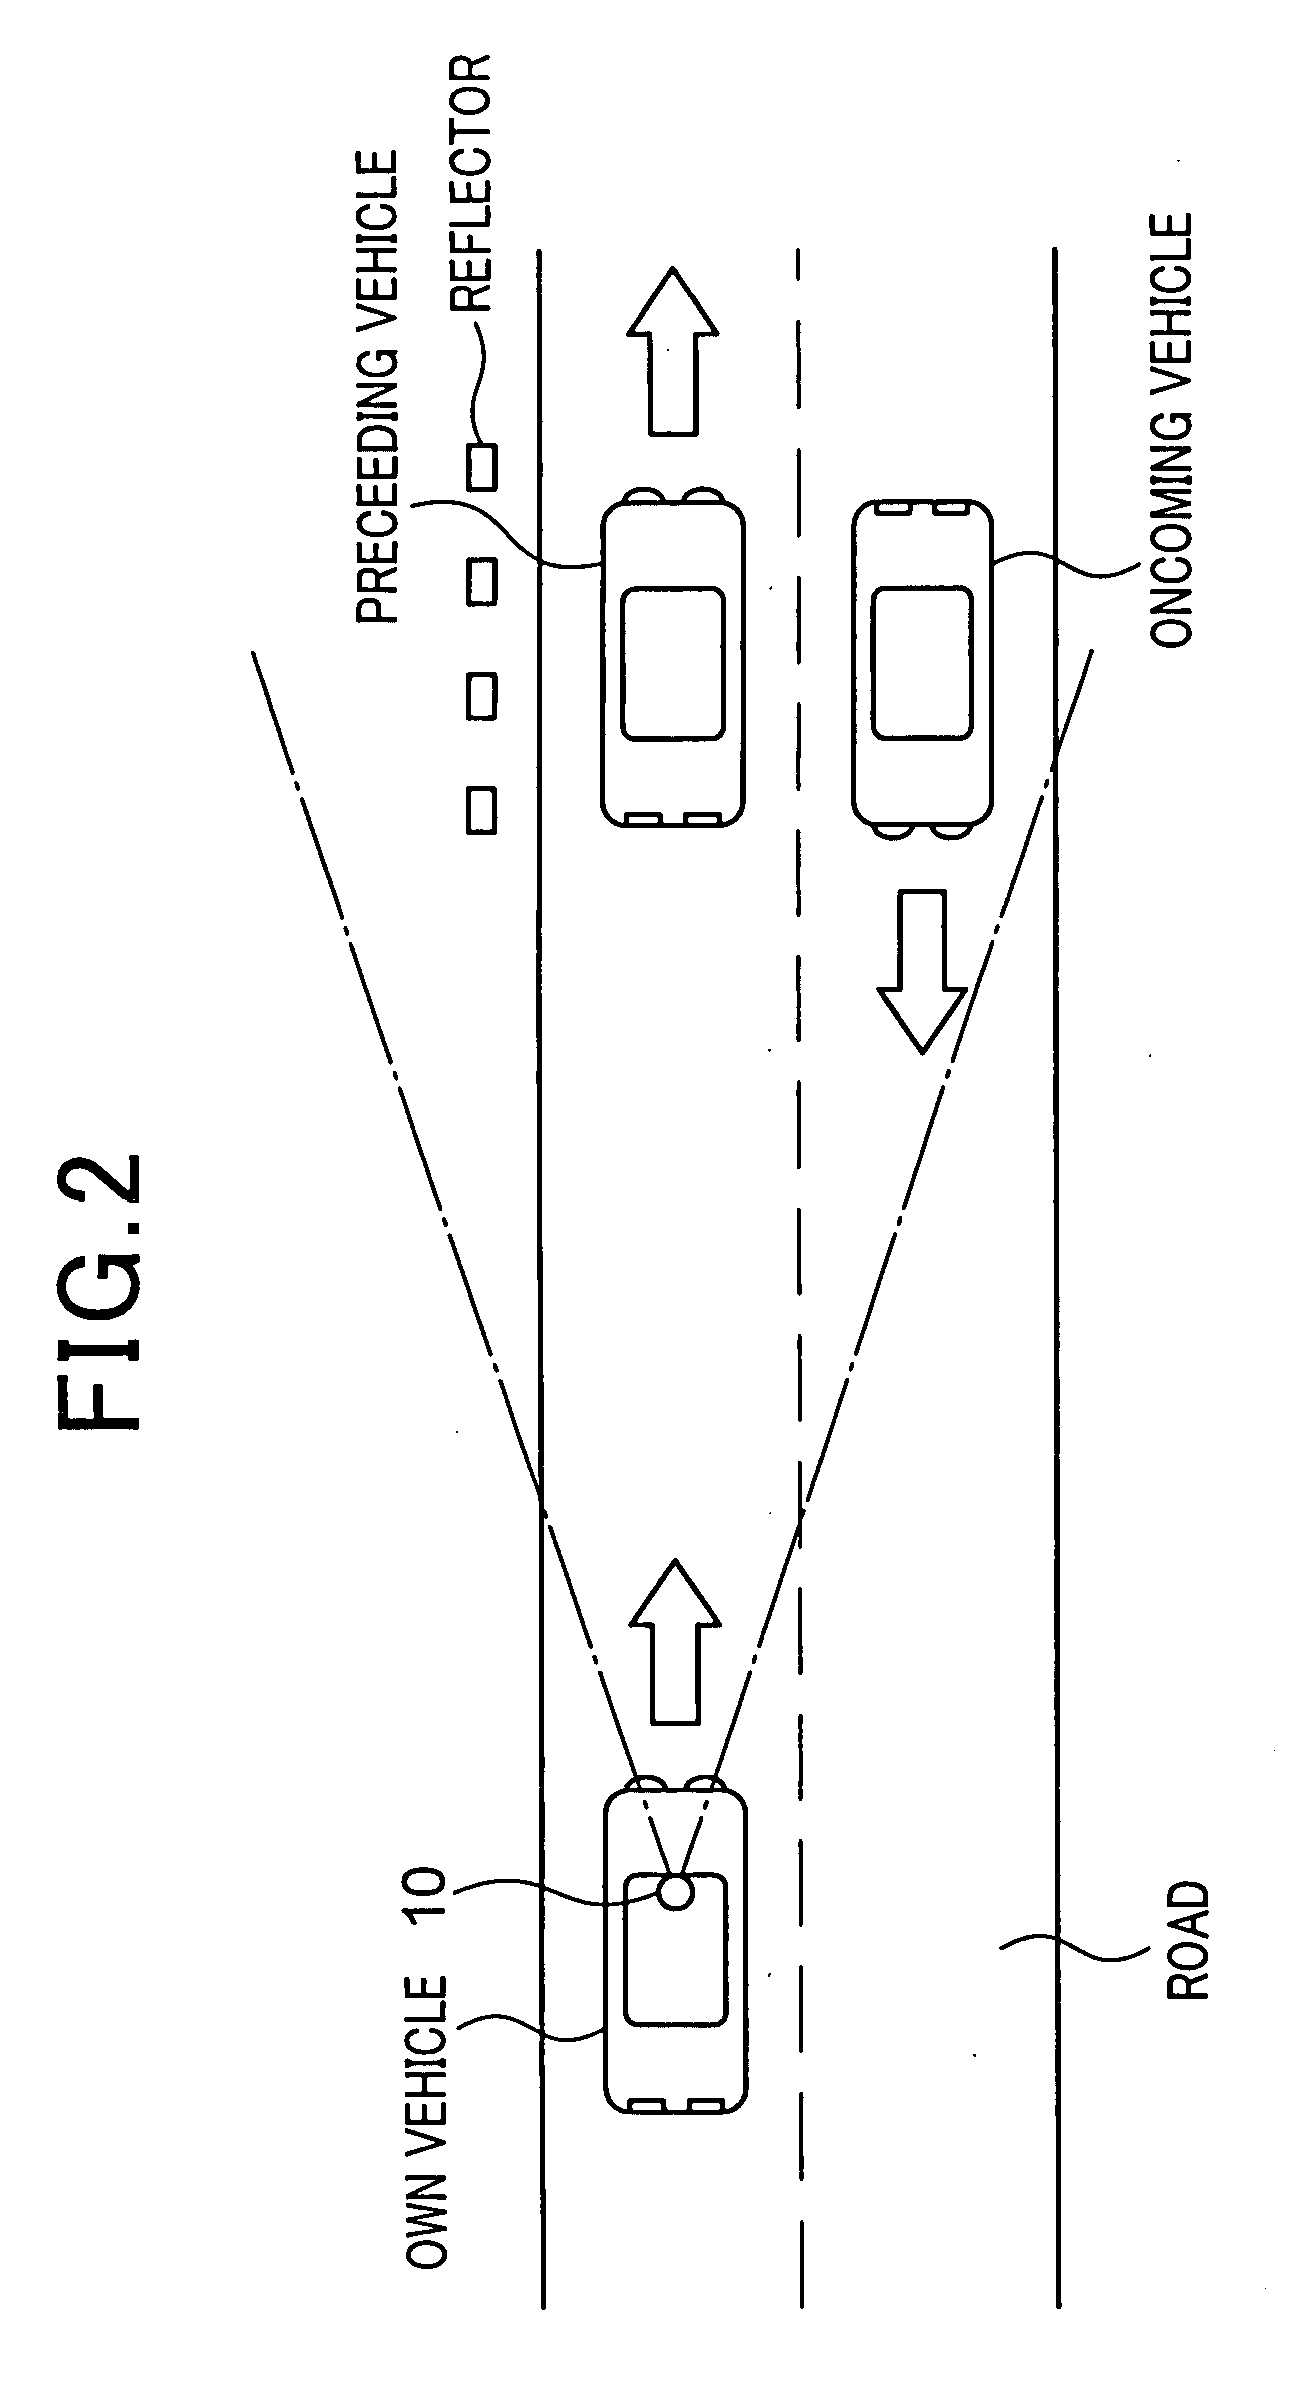 On-board device for detecting vehicles and apparatus for controlling headlights using the device